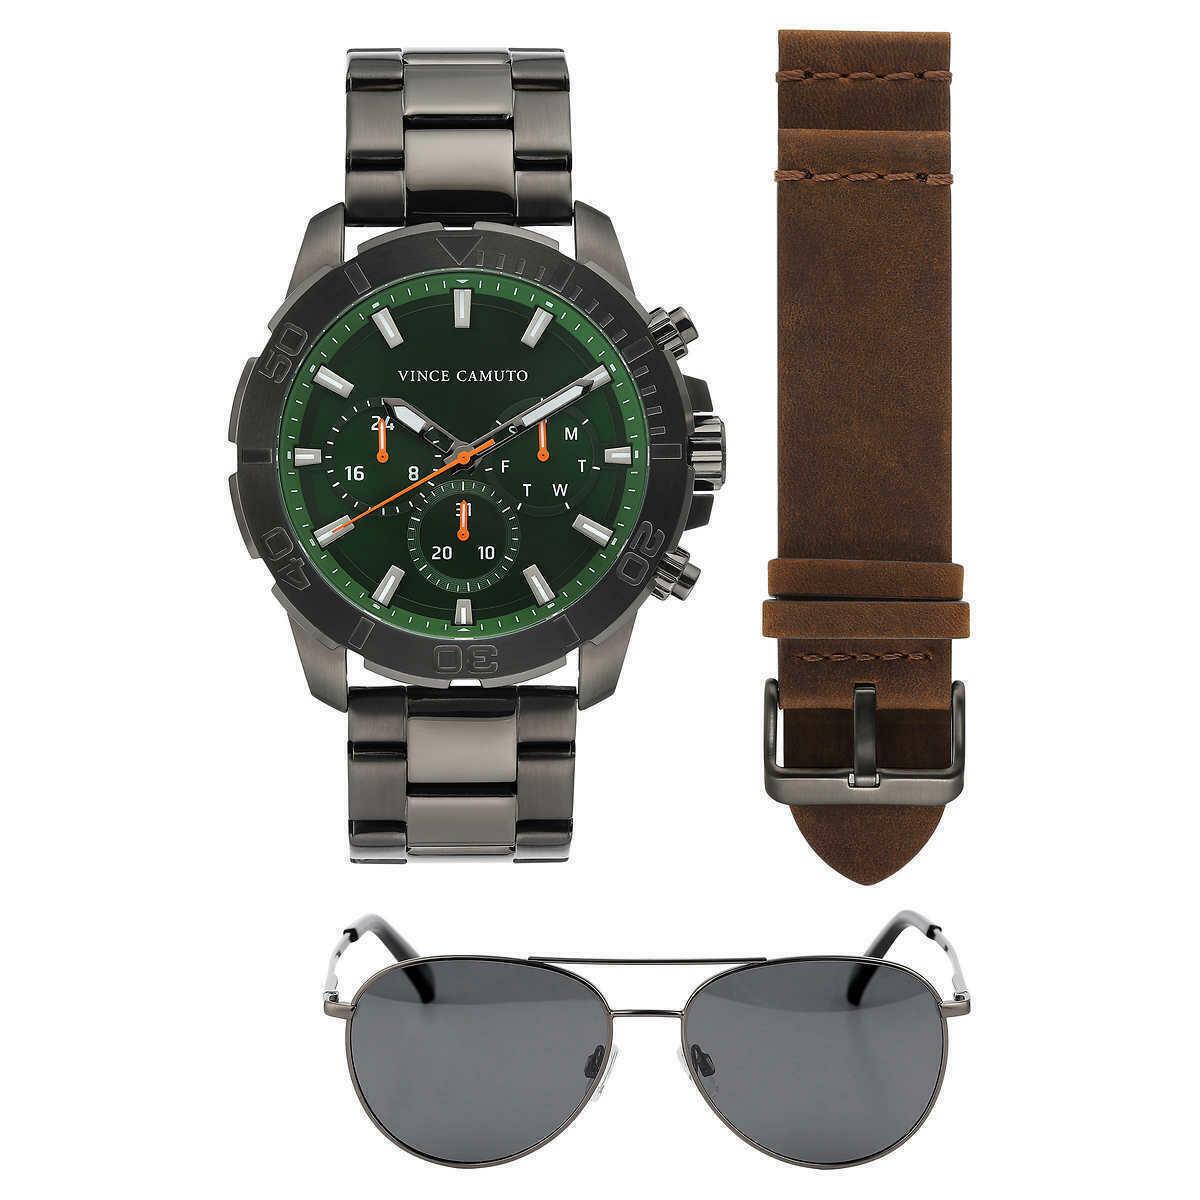 Vince Camuto Men s Gift Set Chronograph Watch with Sunglasses - VC1147GNDGST